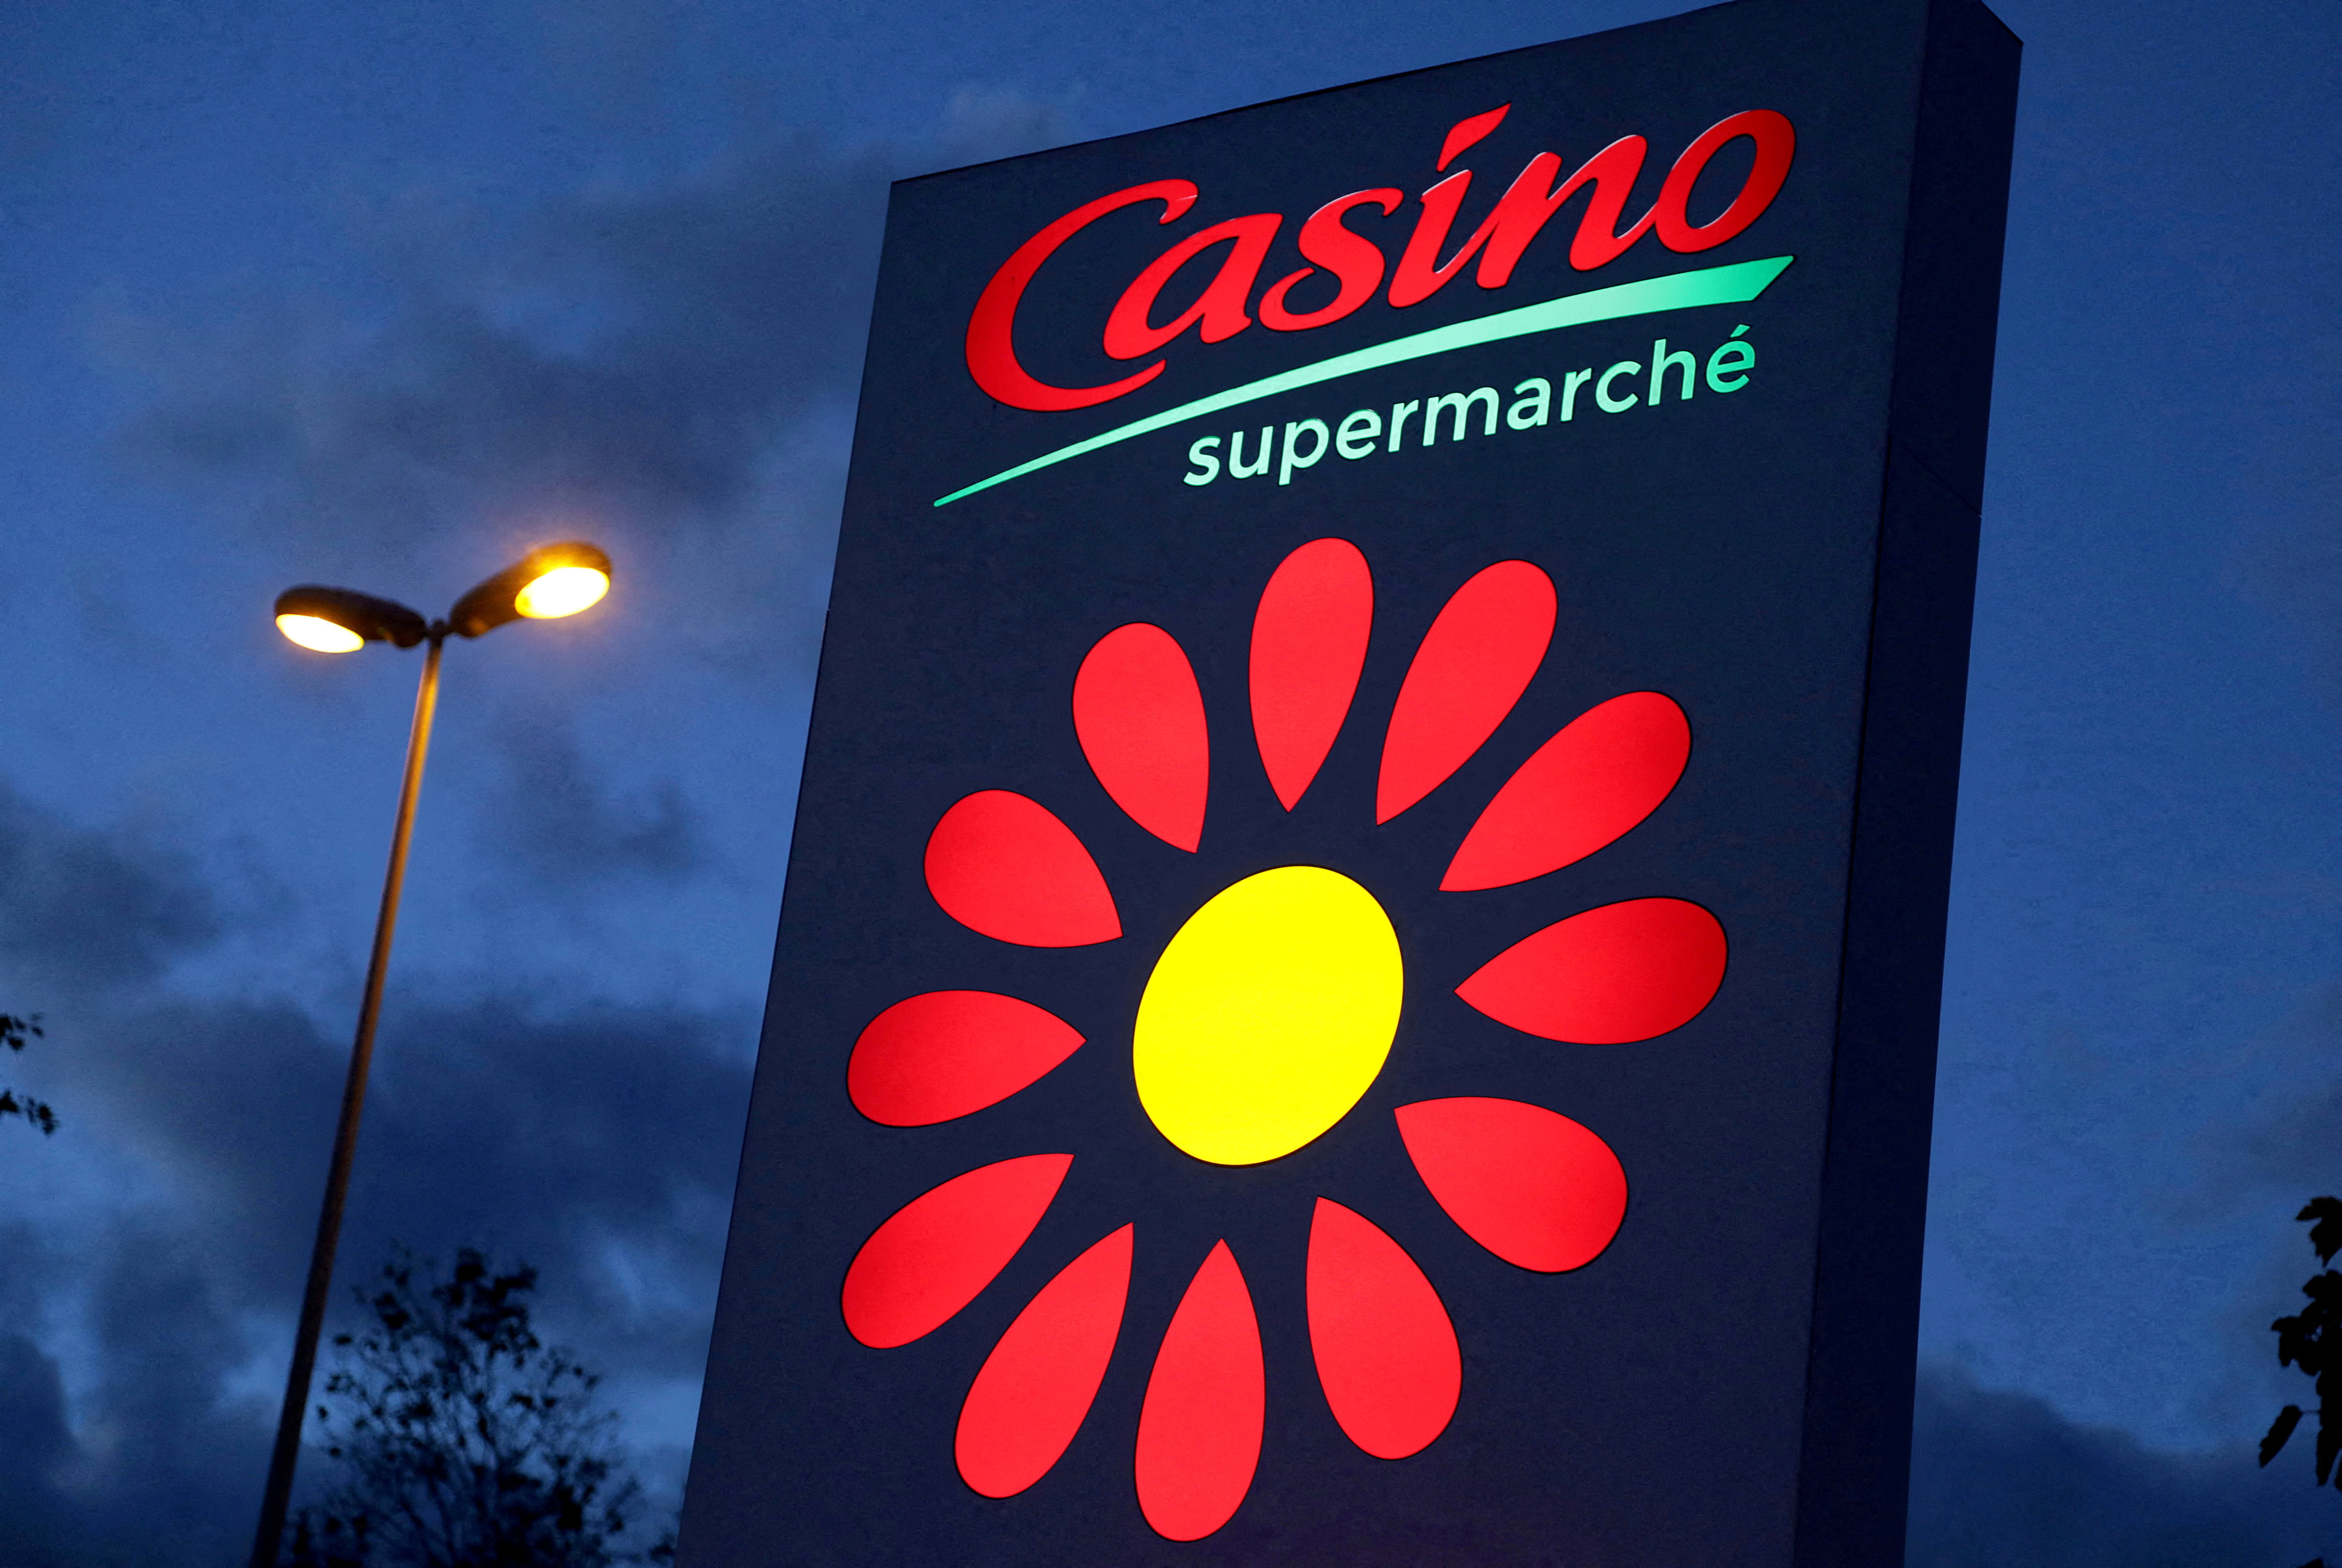 The logo of Casino supermarket is pictured in Cannes